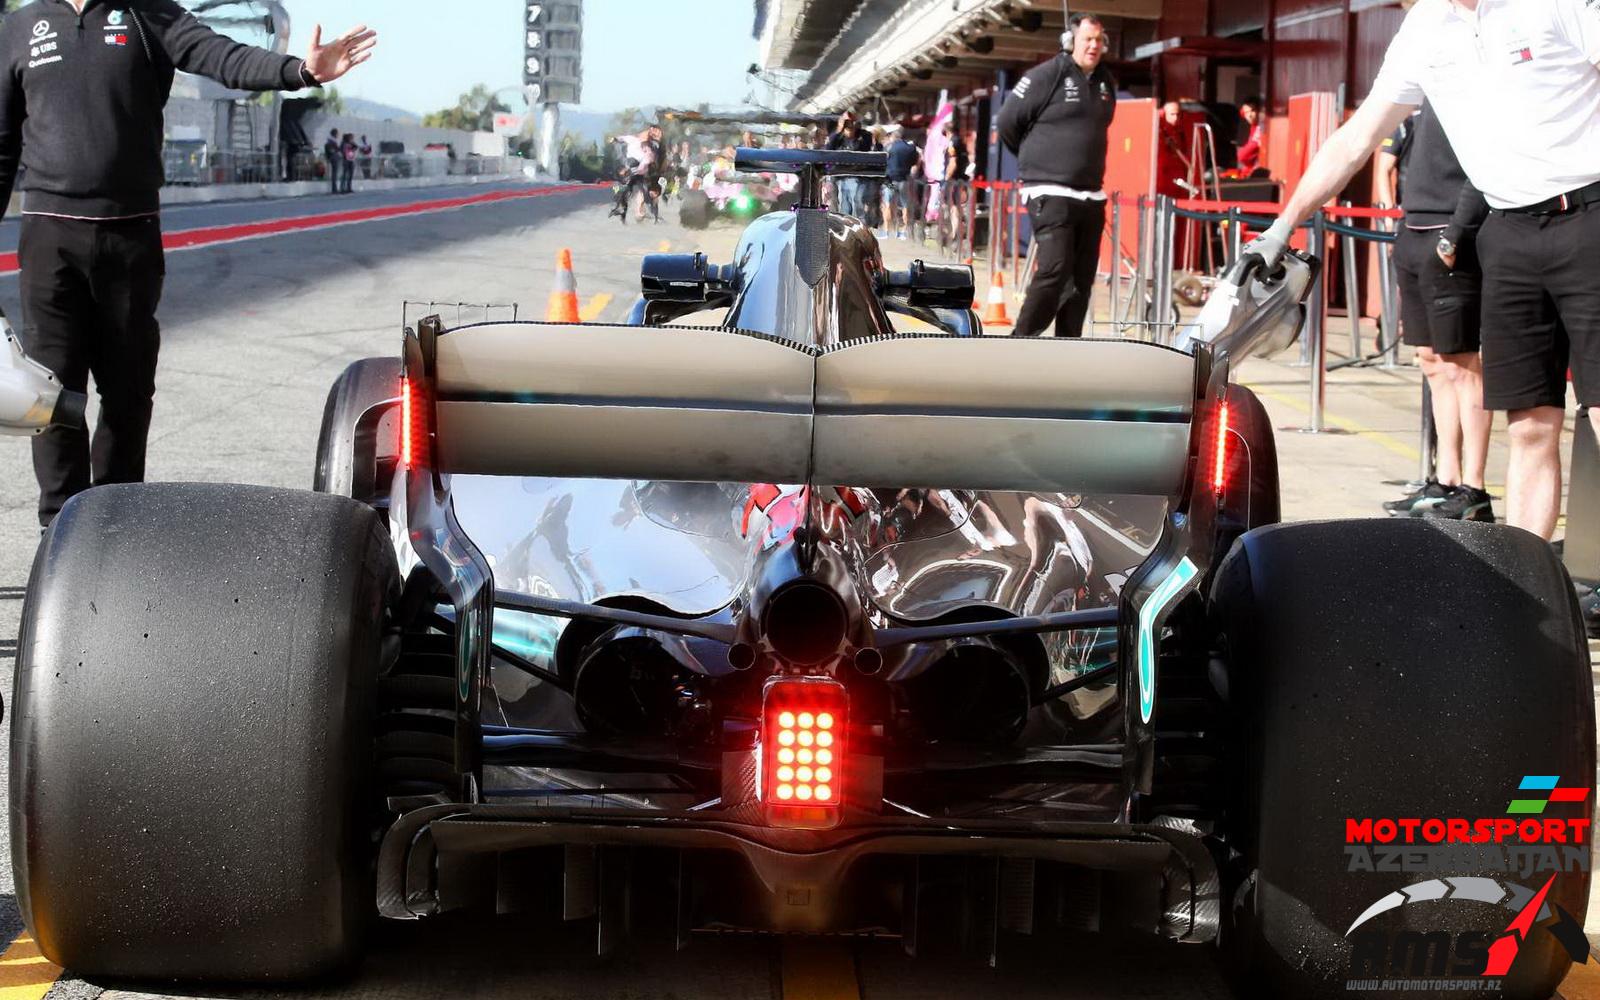 Mercedes with red led lights on the rear wing